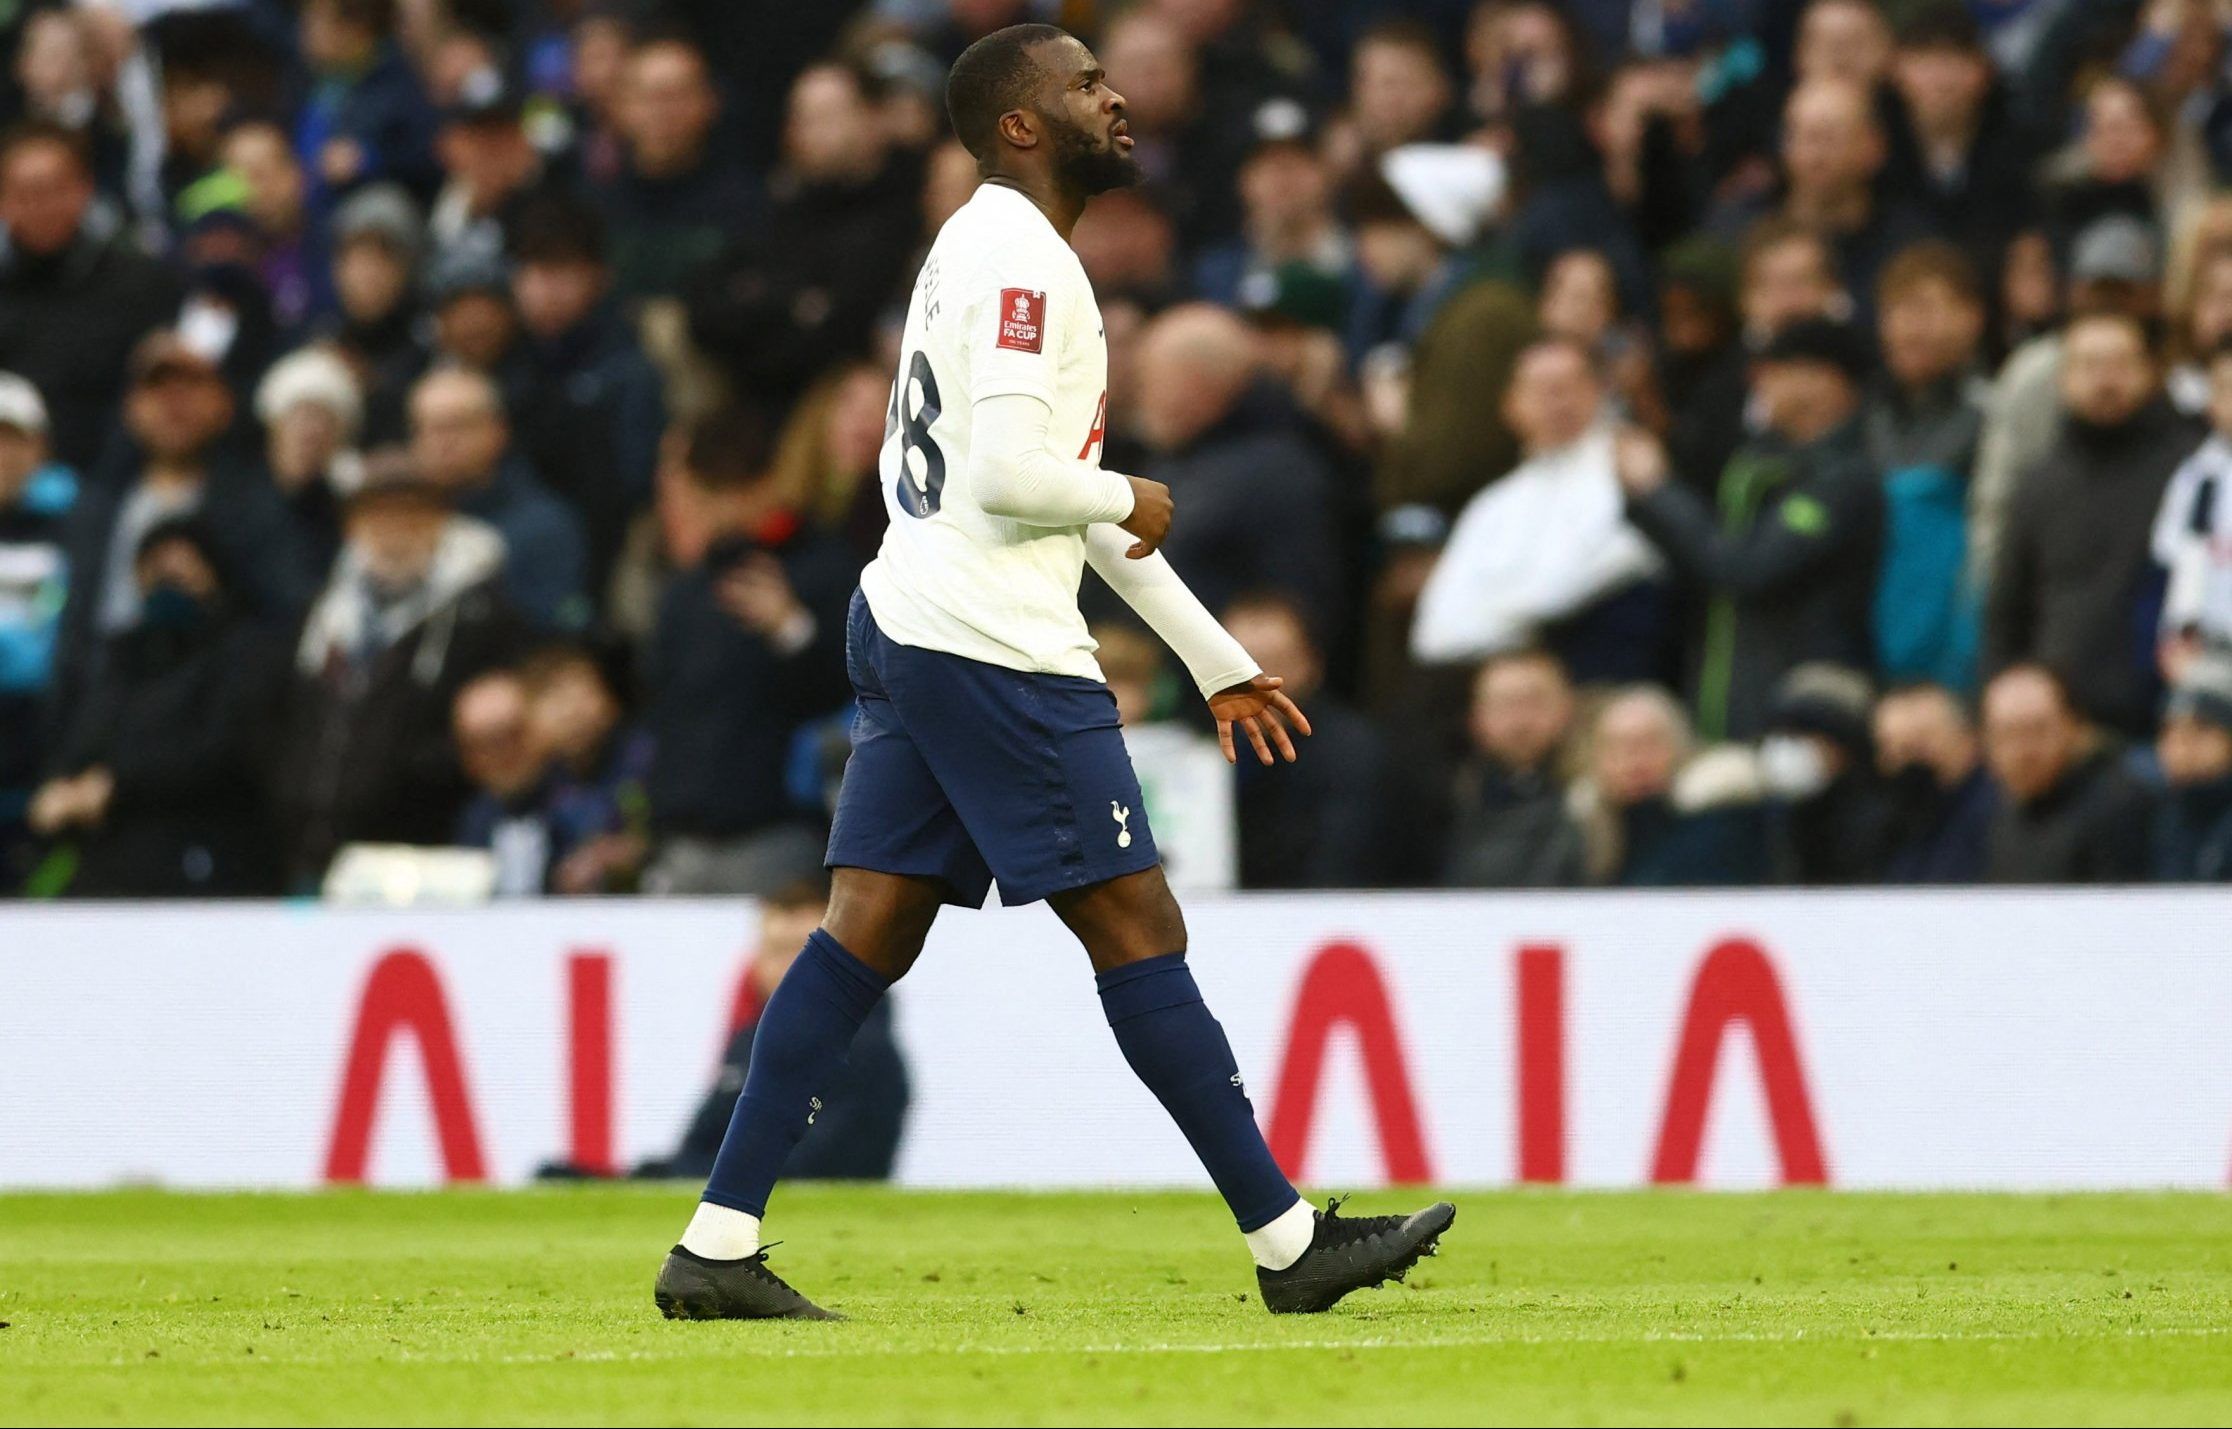 Spurs midfielder Tanguy Ndombele is substituted against Morecambe in the FA Cup